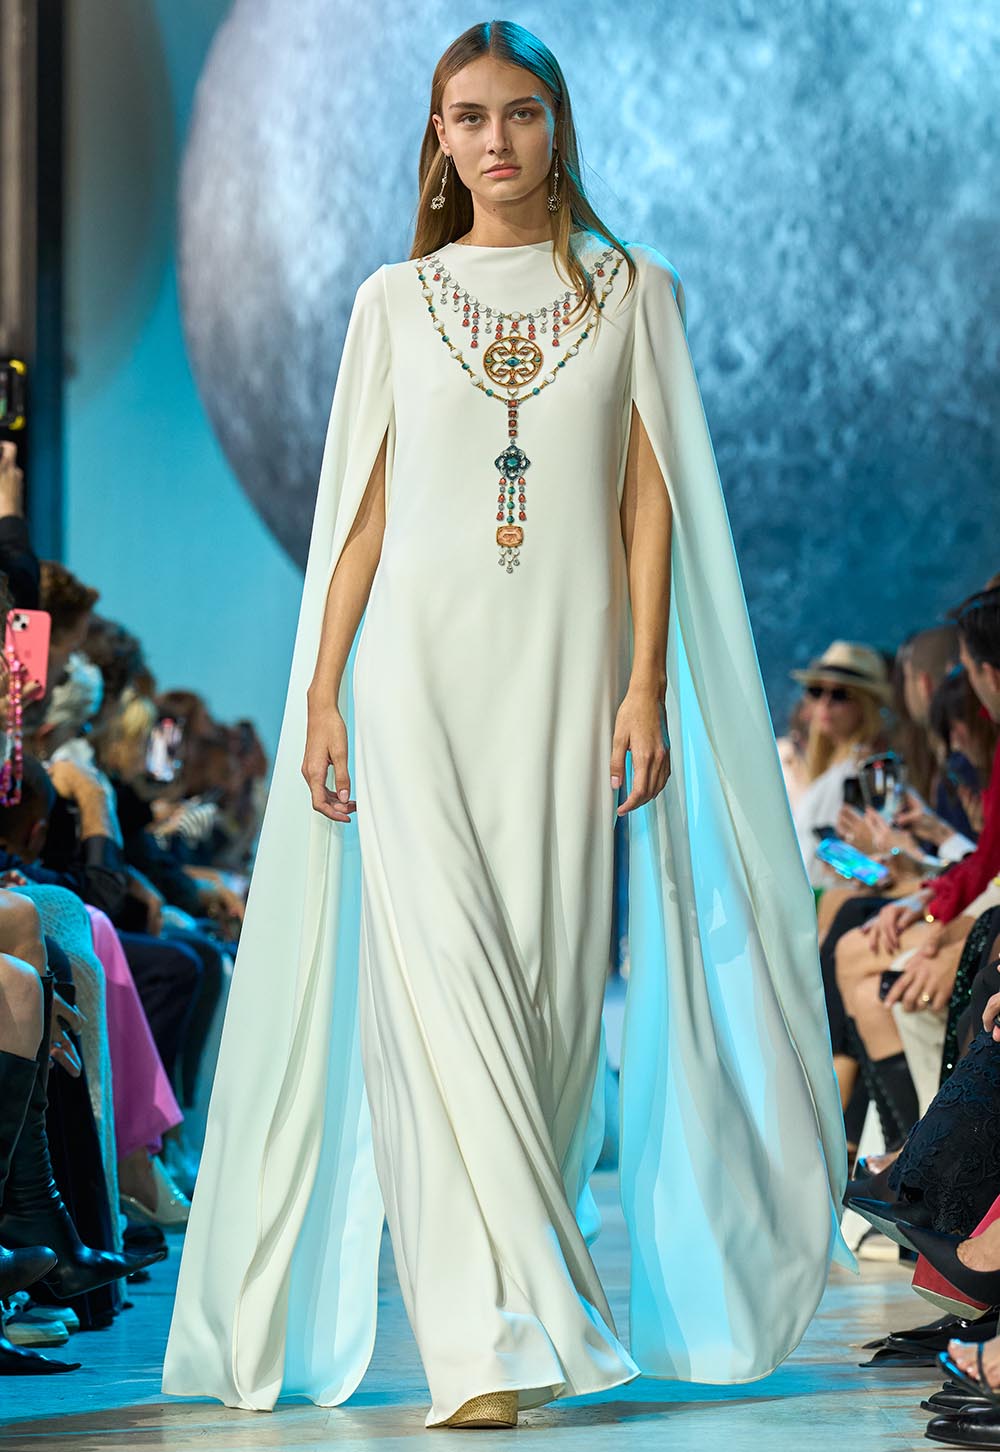 PICS: 16 Magical Gowns From Elie Saab's Med-Inspired Show